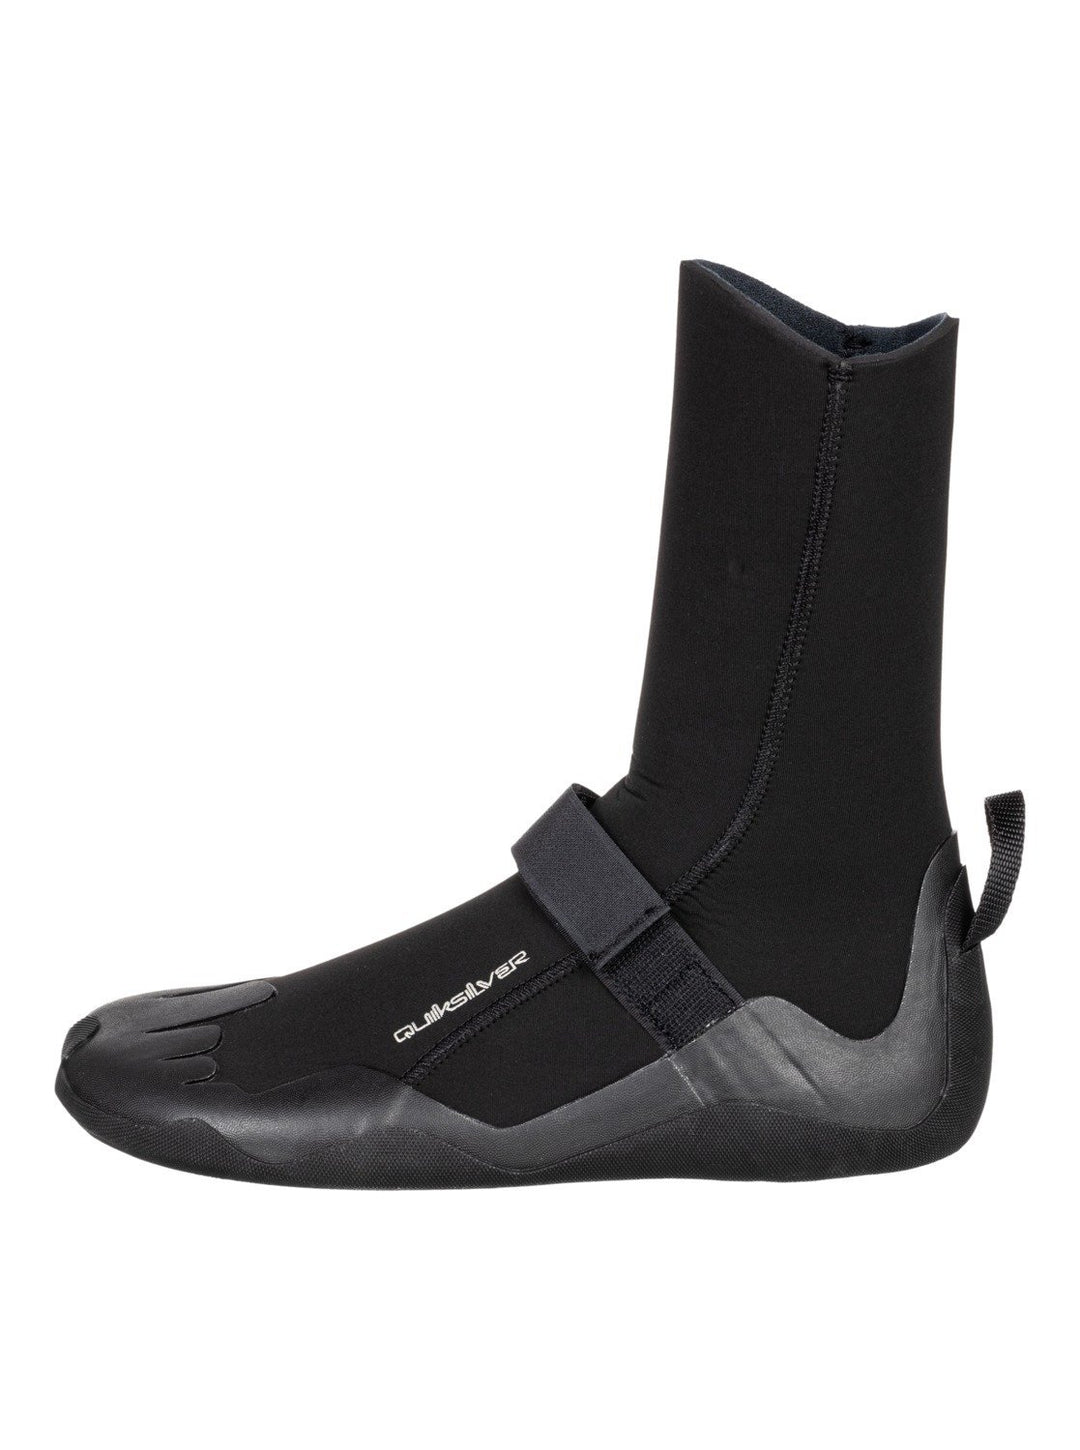 Quiksilver Everyday Sessions 5mm Round Toe Wetsuit Boot